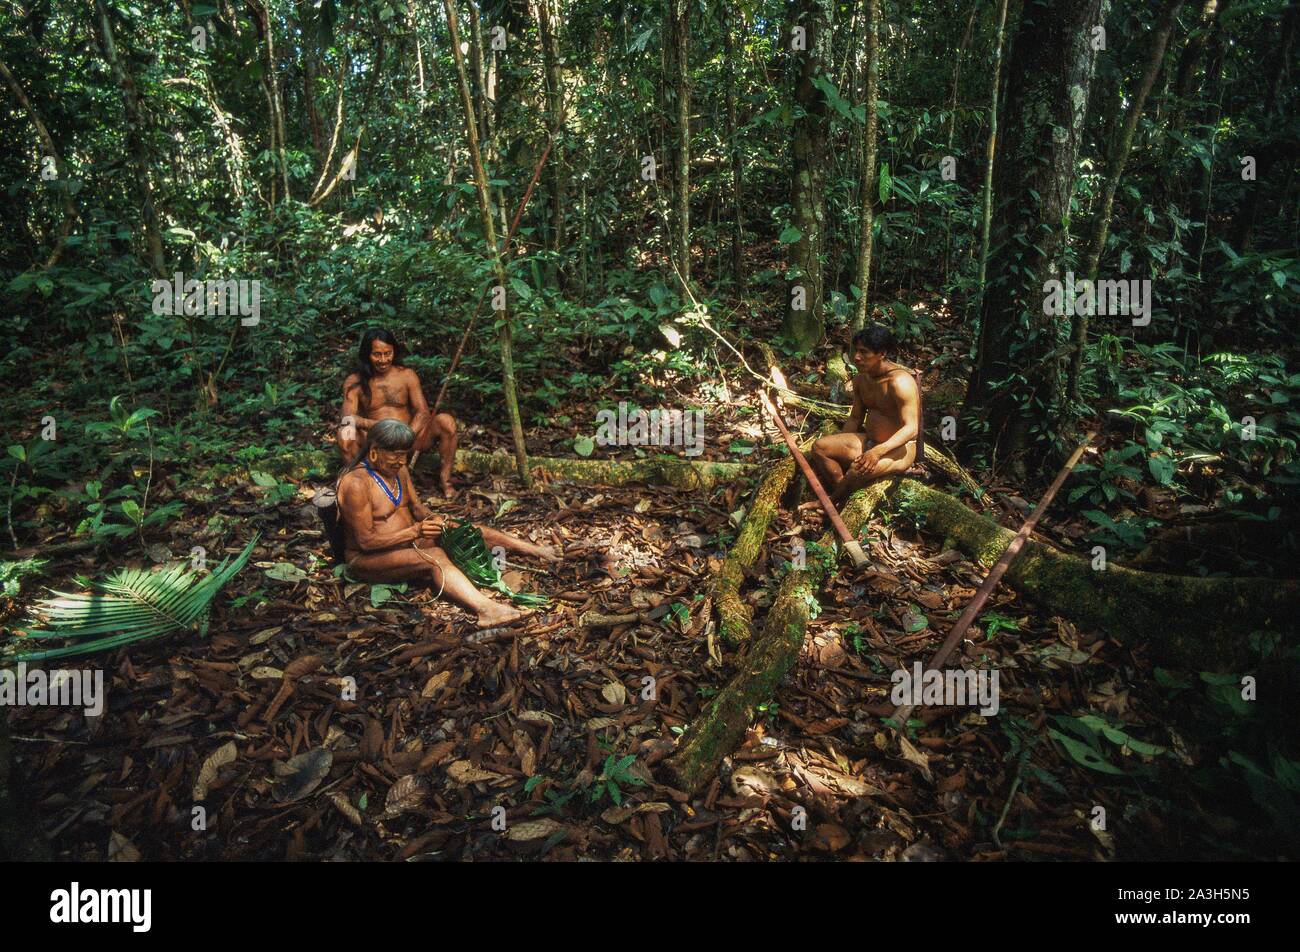 Ecuador, Orellana, Rio Cononaco, Construction of a hut and baskets, the Huaorani are one of the last two tribes of hunter-gatherers who live in the heart of the rainforest of Ecuador Stock Photo